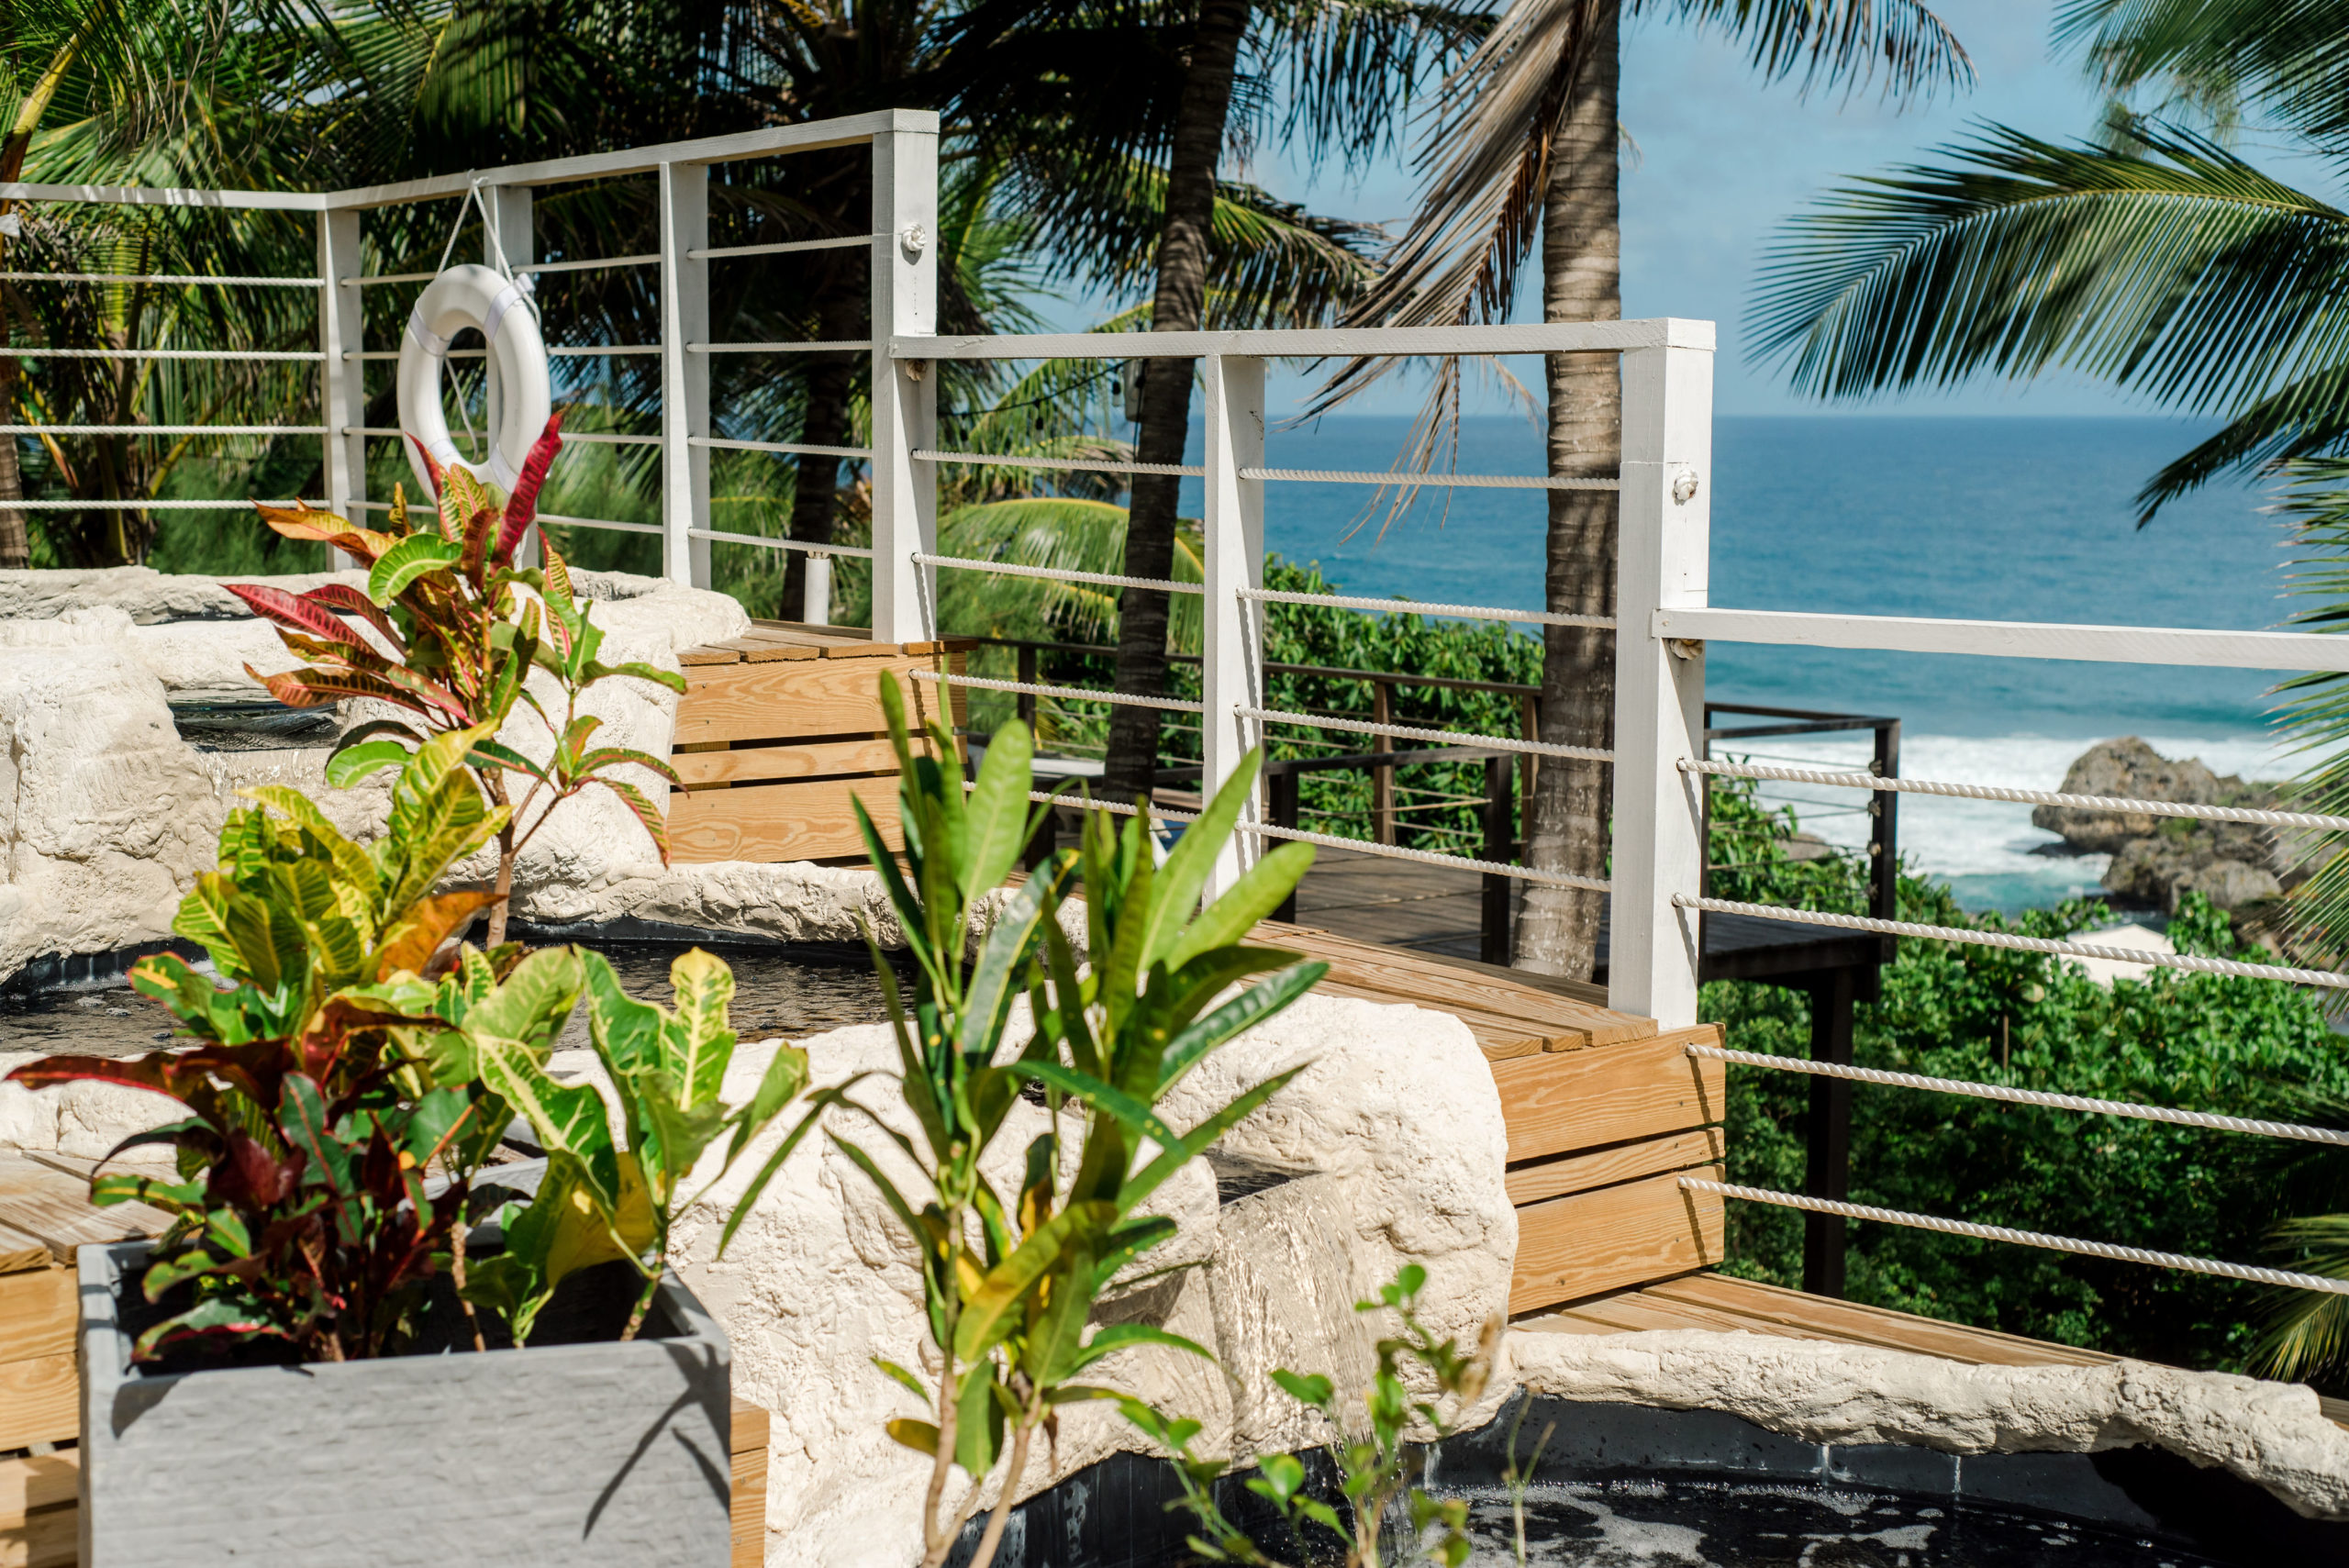 Inspired By Nature, Our Rooms Feature Local Arts + Crafts, ECO-Friendly Amenities And Views Of The Bathsheba Coastline